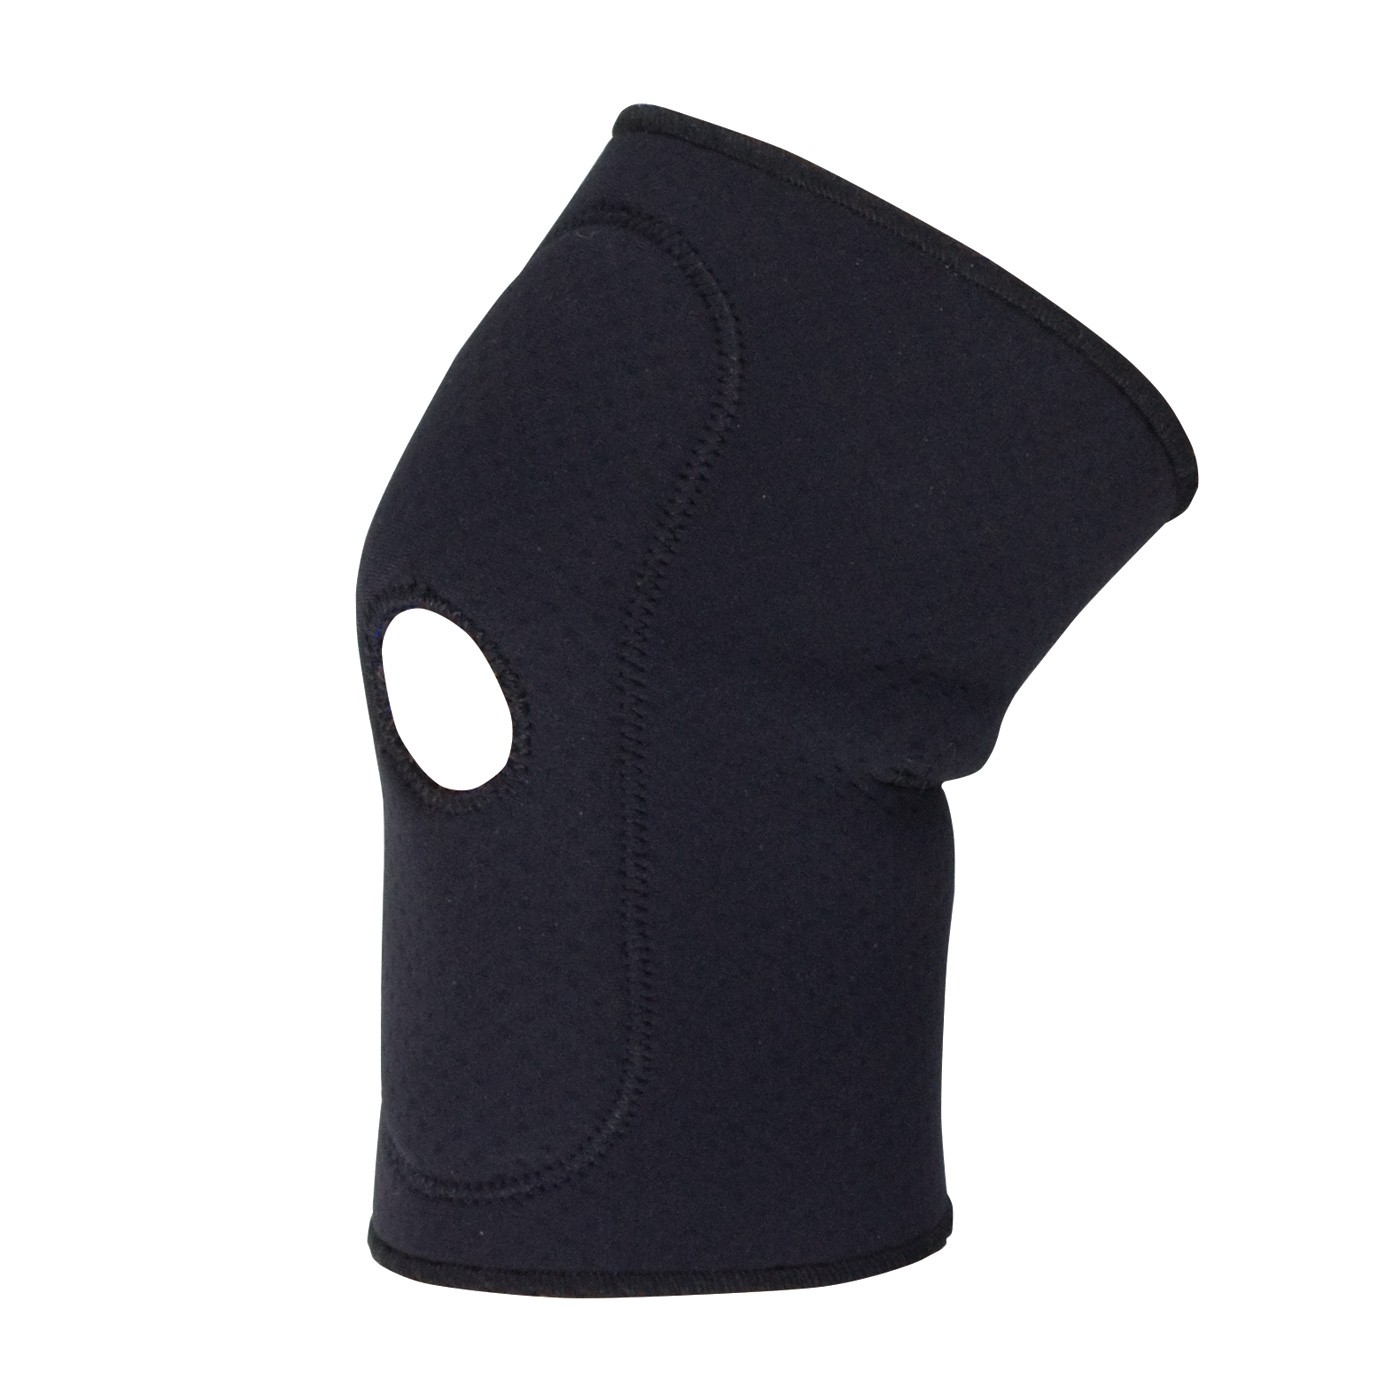 Elbow Sleeve, Small 13-14", Terry Lined Neoprene w/ Nylon Outer Shell